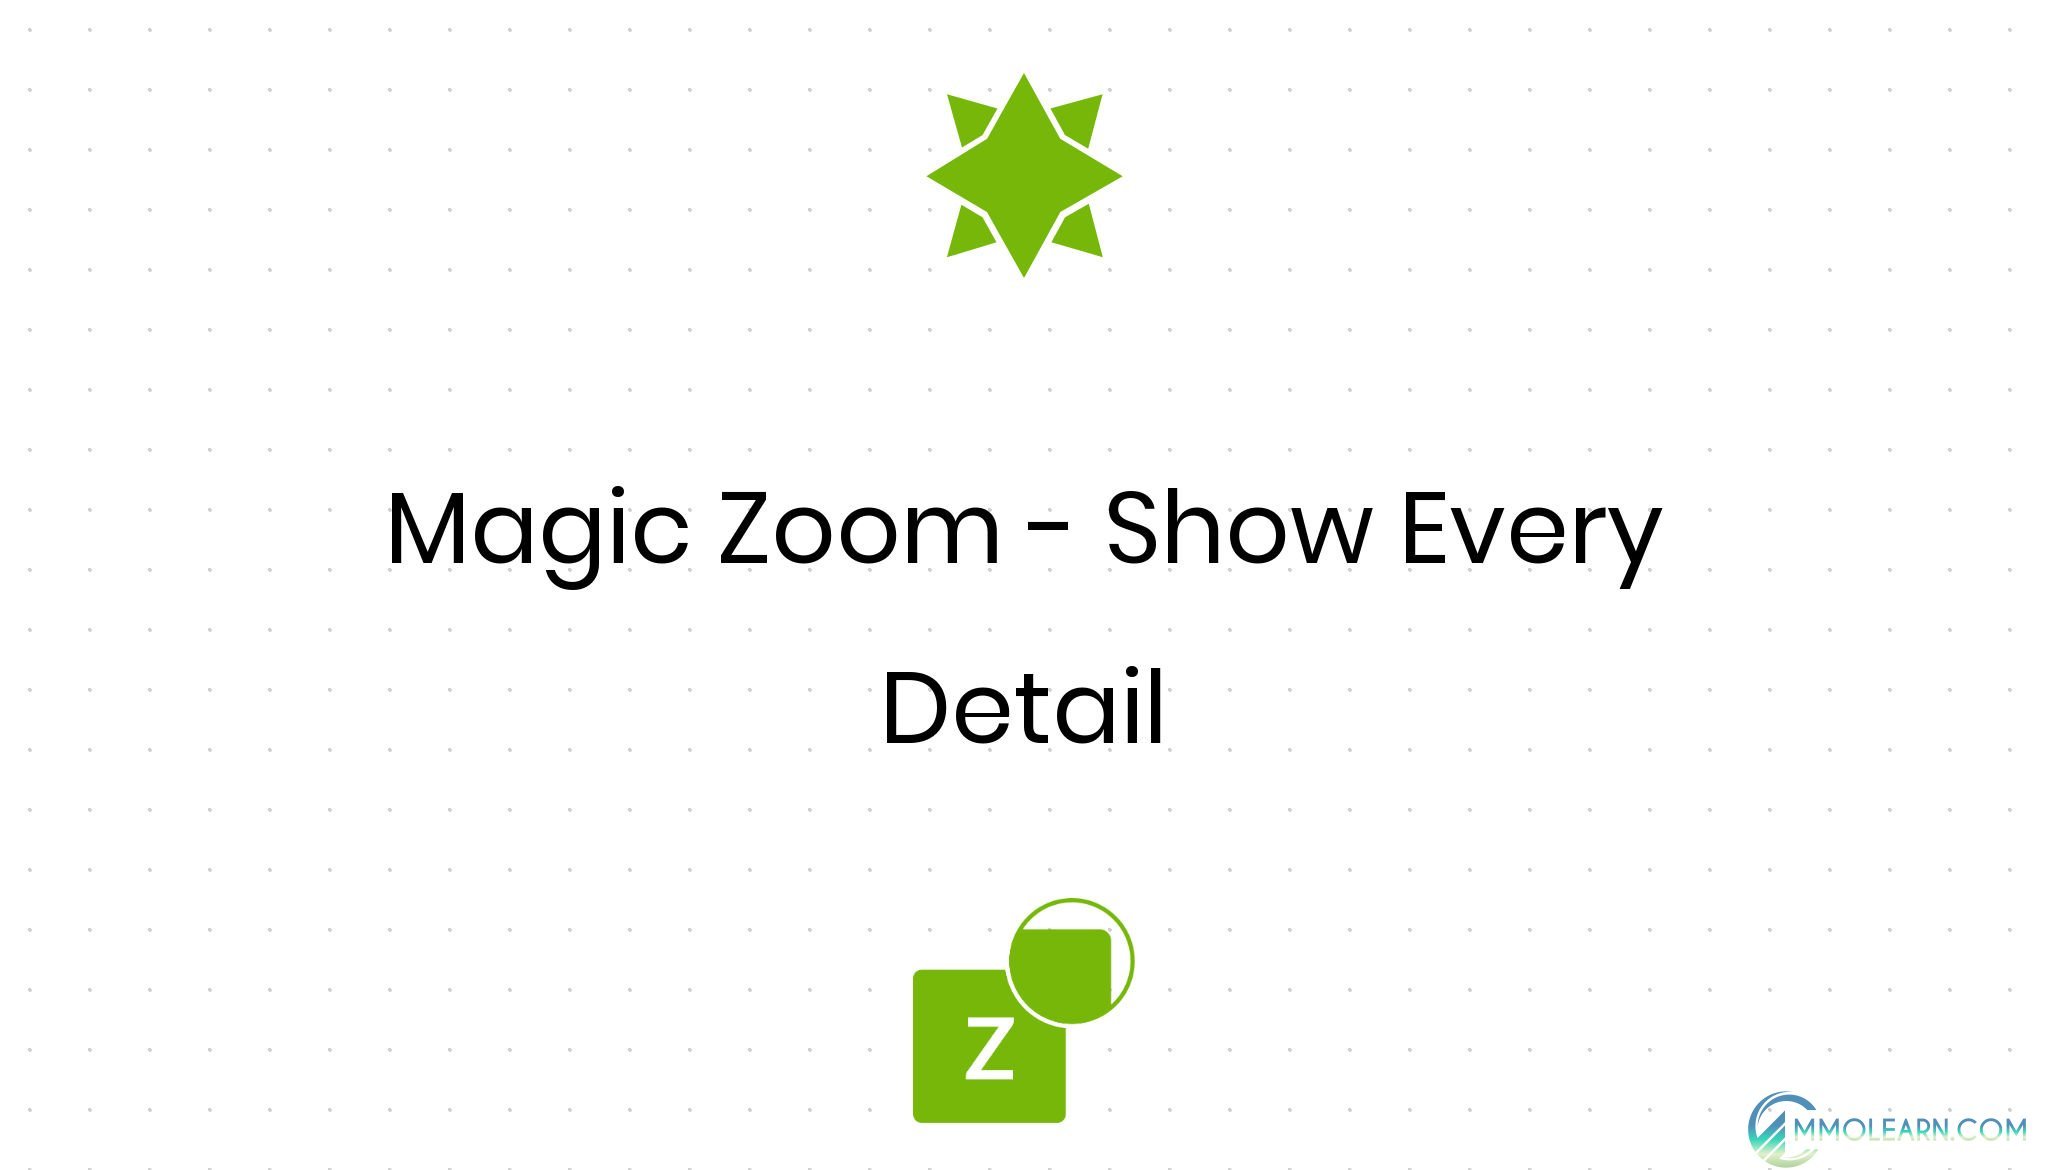 Magic Zoom - The elegant way to show high resolution zoomed images.jpg